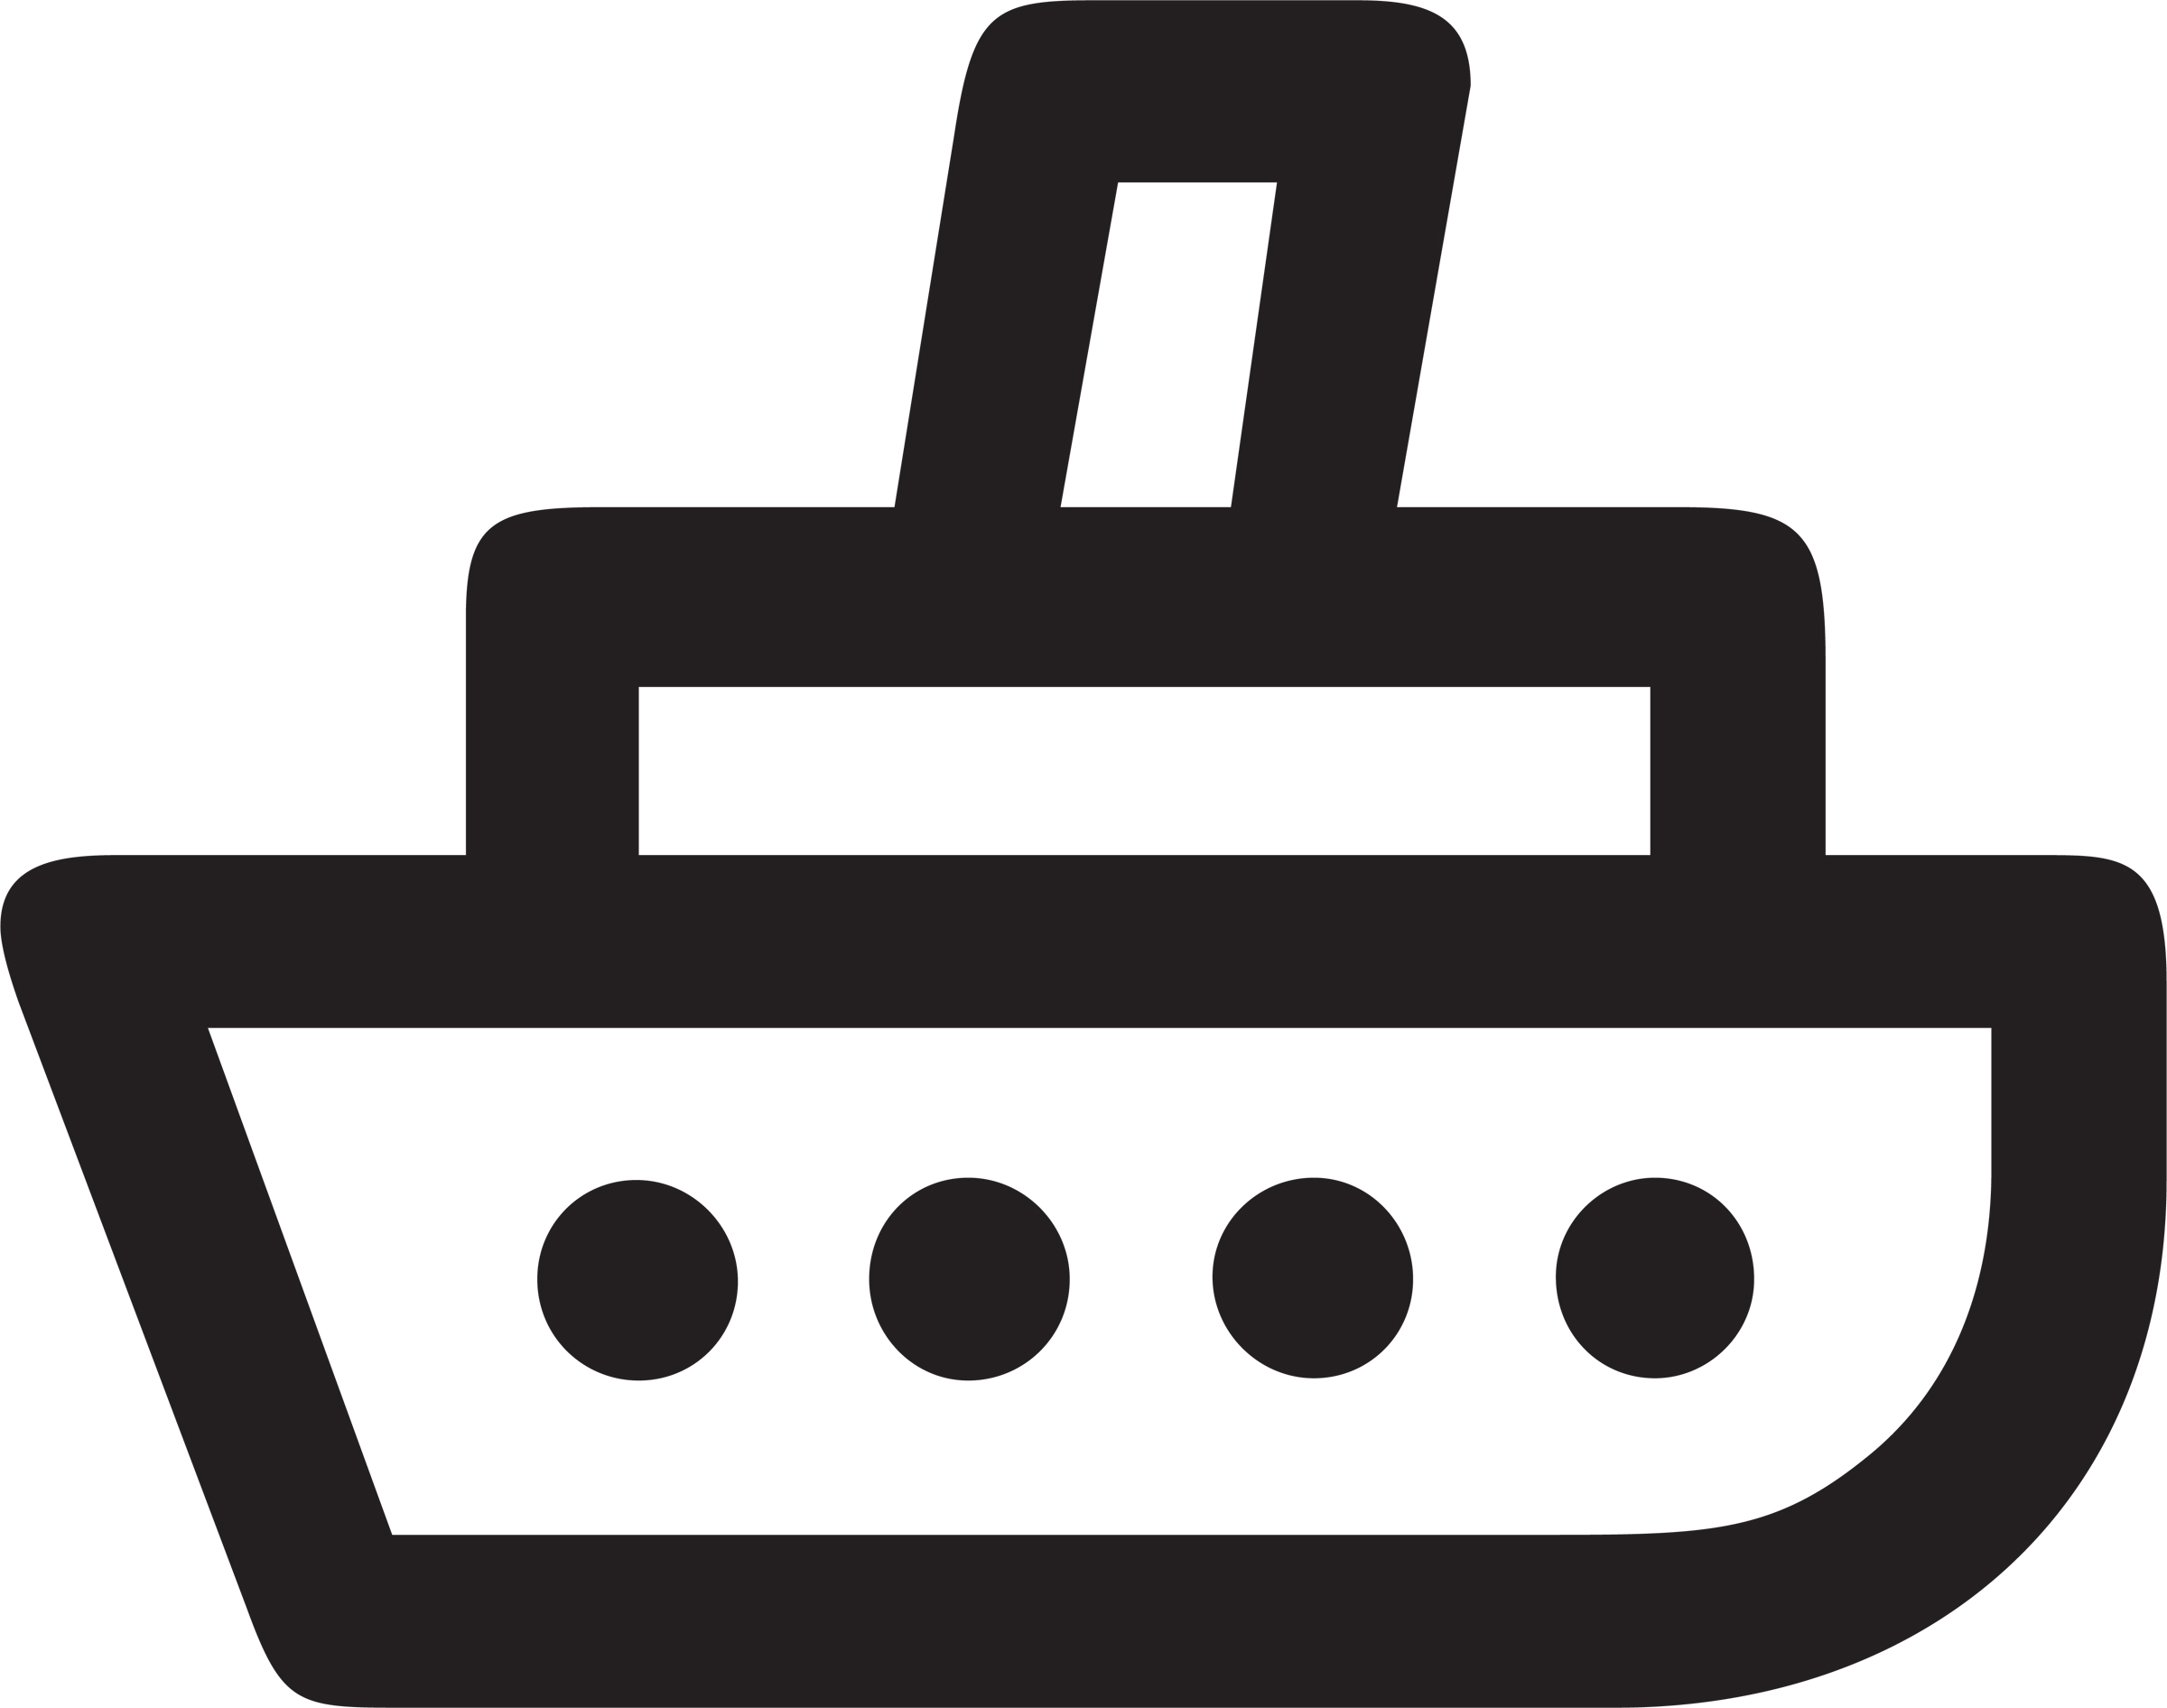 pin Boat clipart black and wh